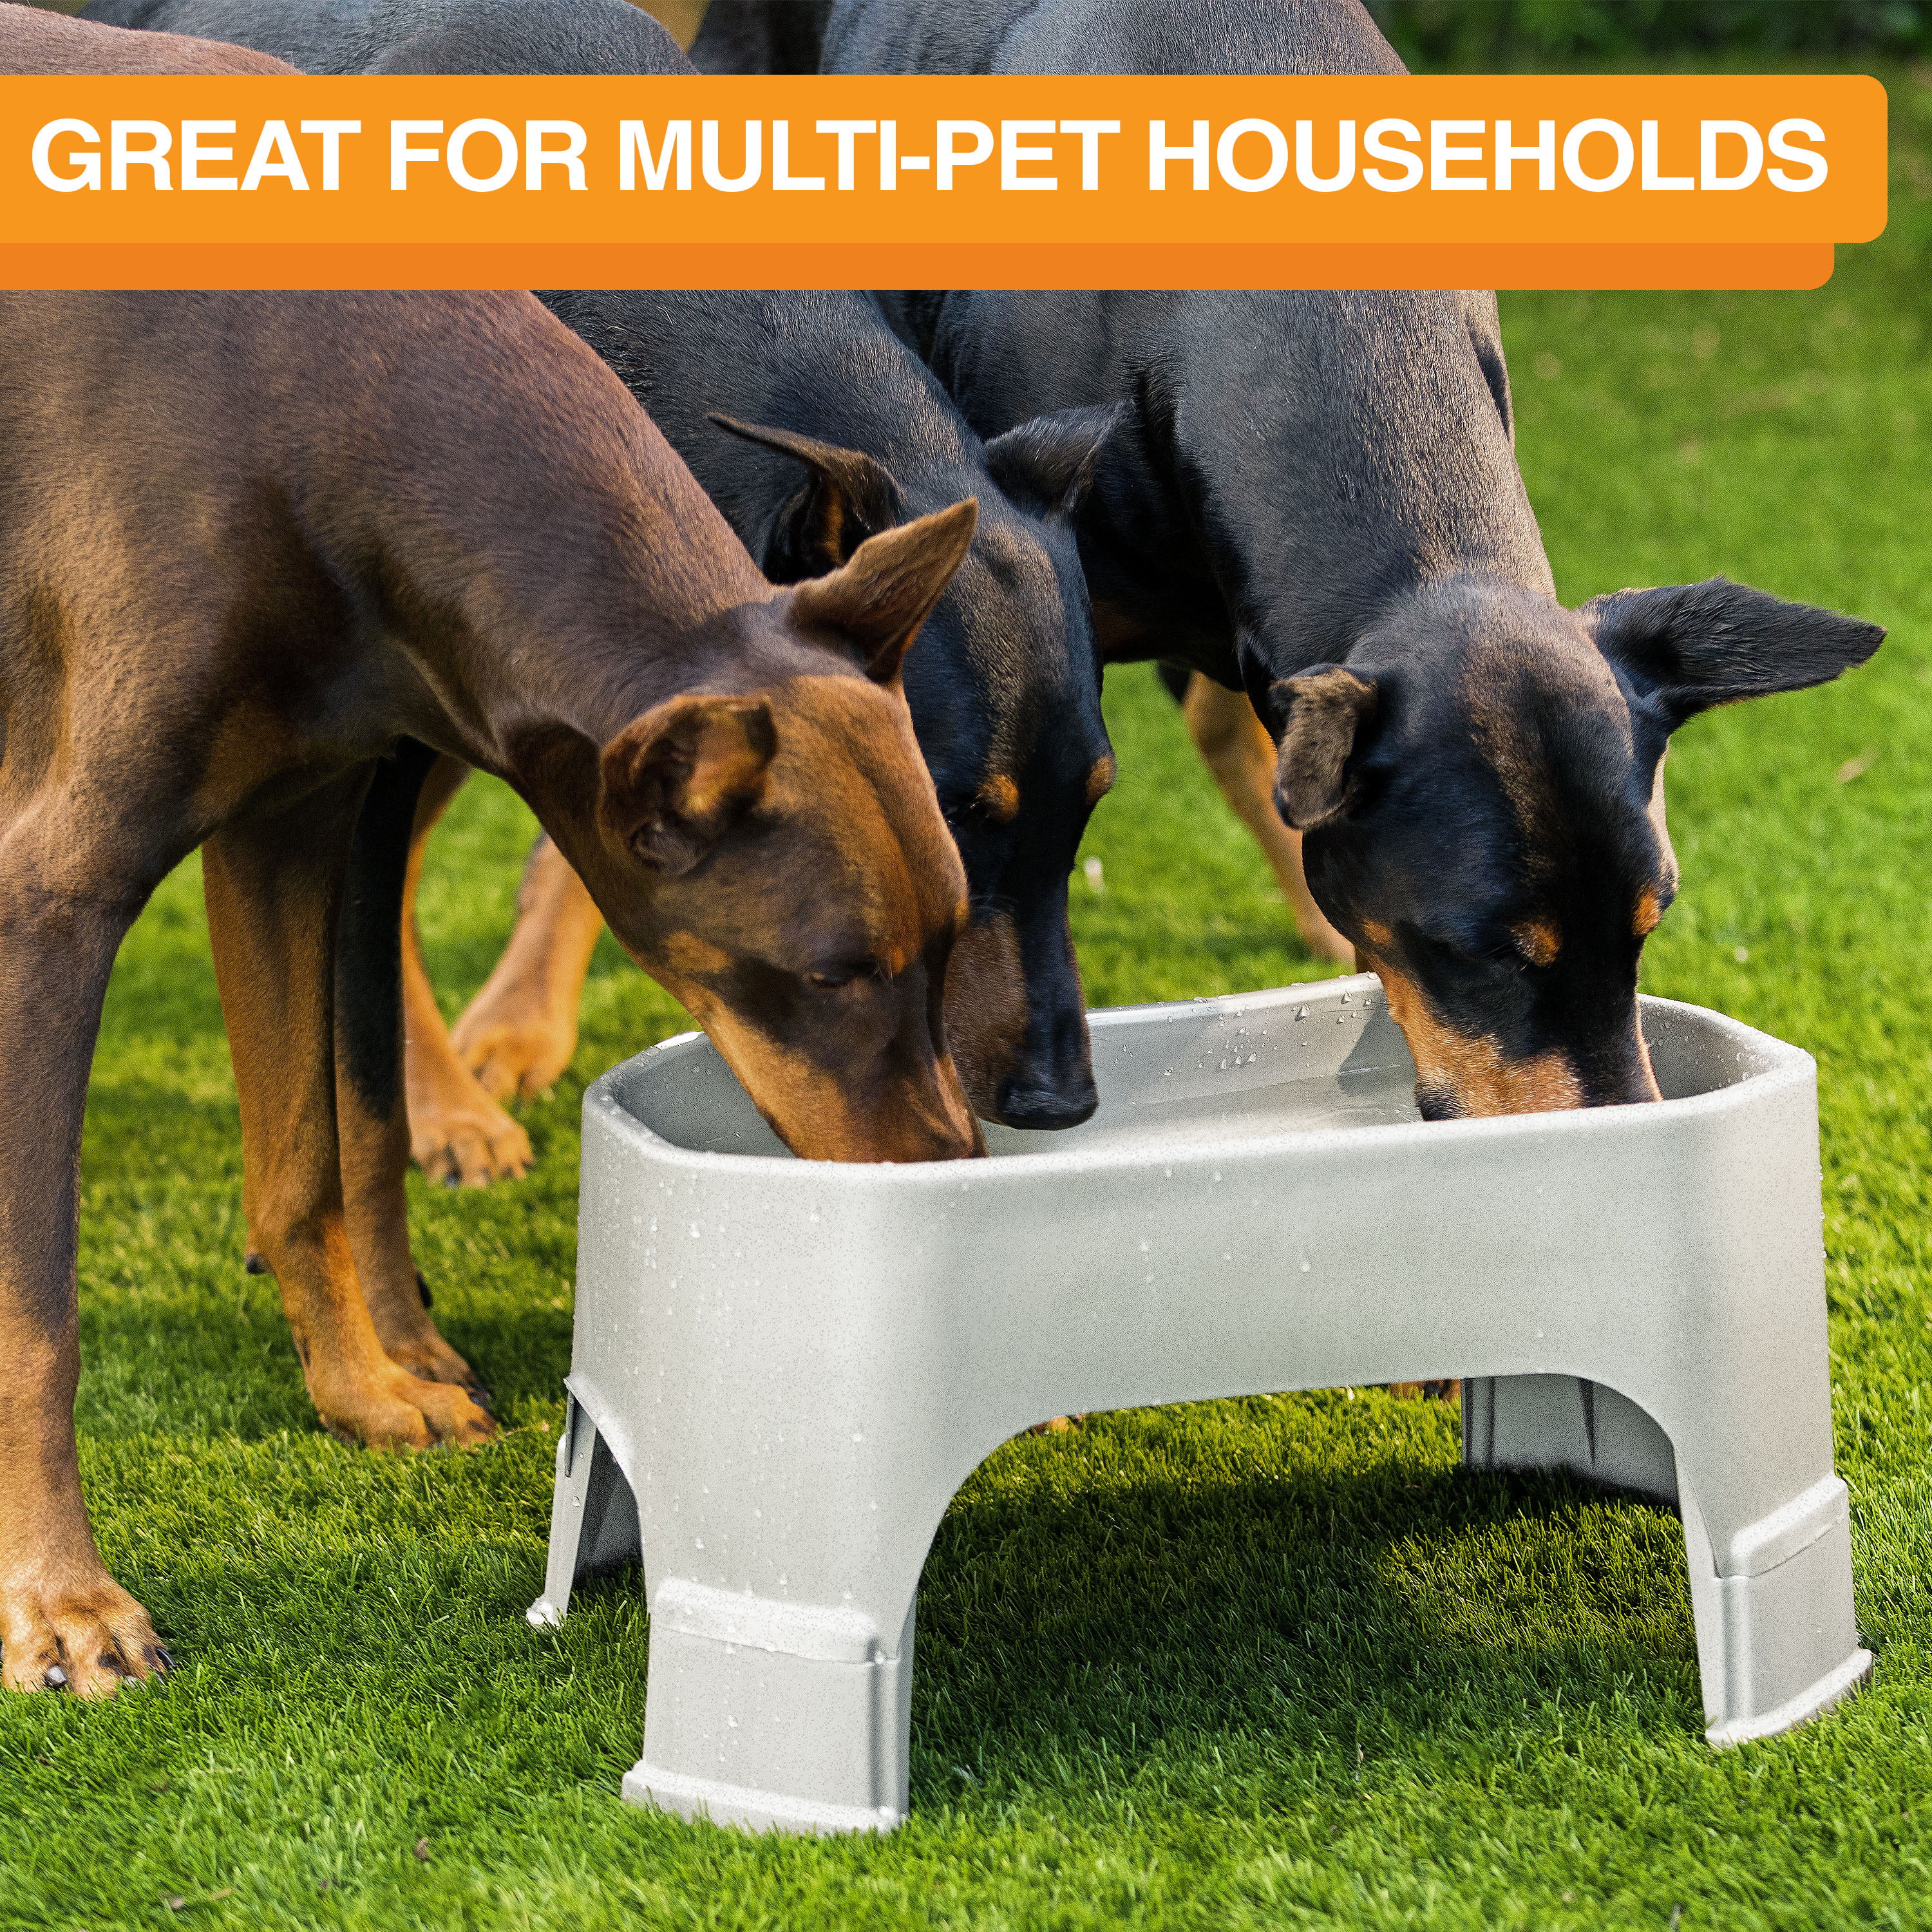 Neater Pet Brands Giant Bowl - Extra Large Water Bowl for Dogs - Perfect  for Outdoors (2.25 Gallon Capacity, 288 oz) - Champagne